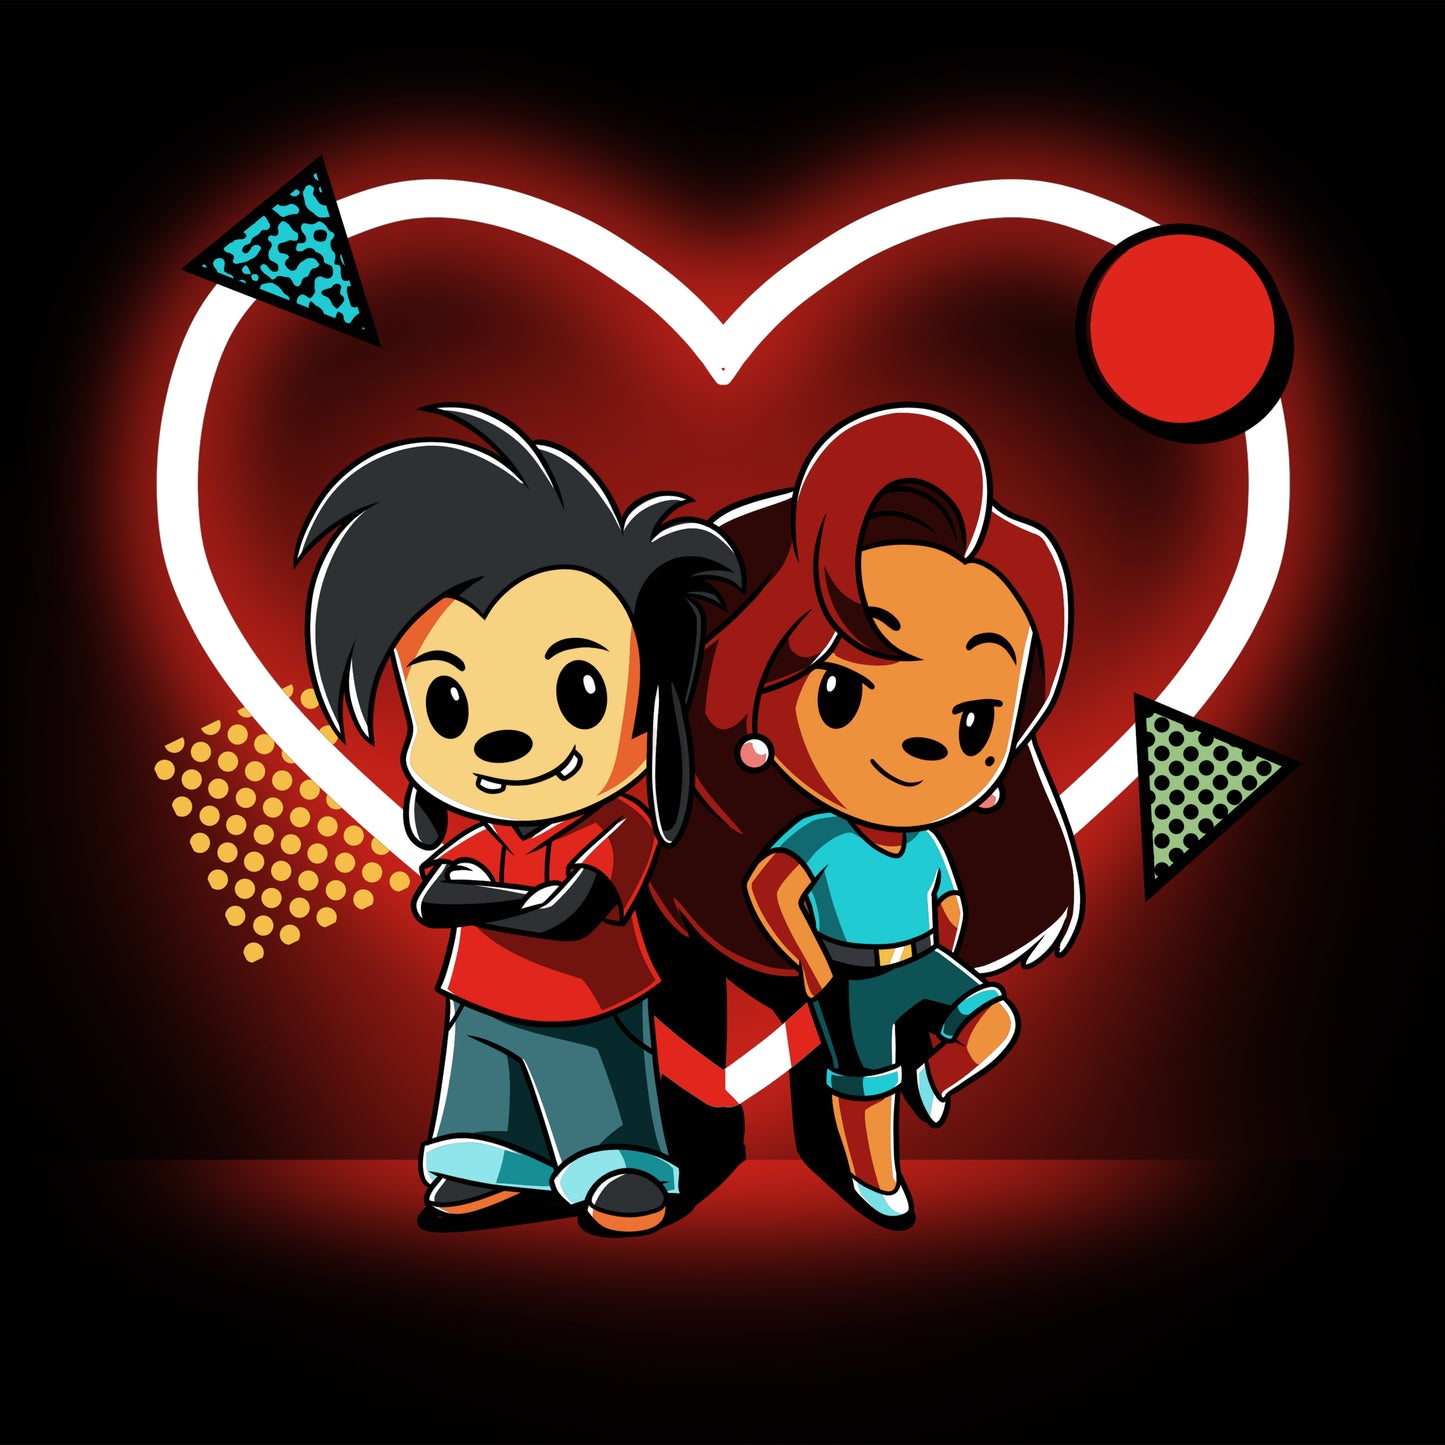 Two Max and Roxanne cartoon characters standing in front of a red heart on a Disney licensed T-shirt.